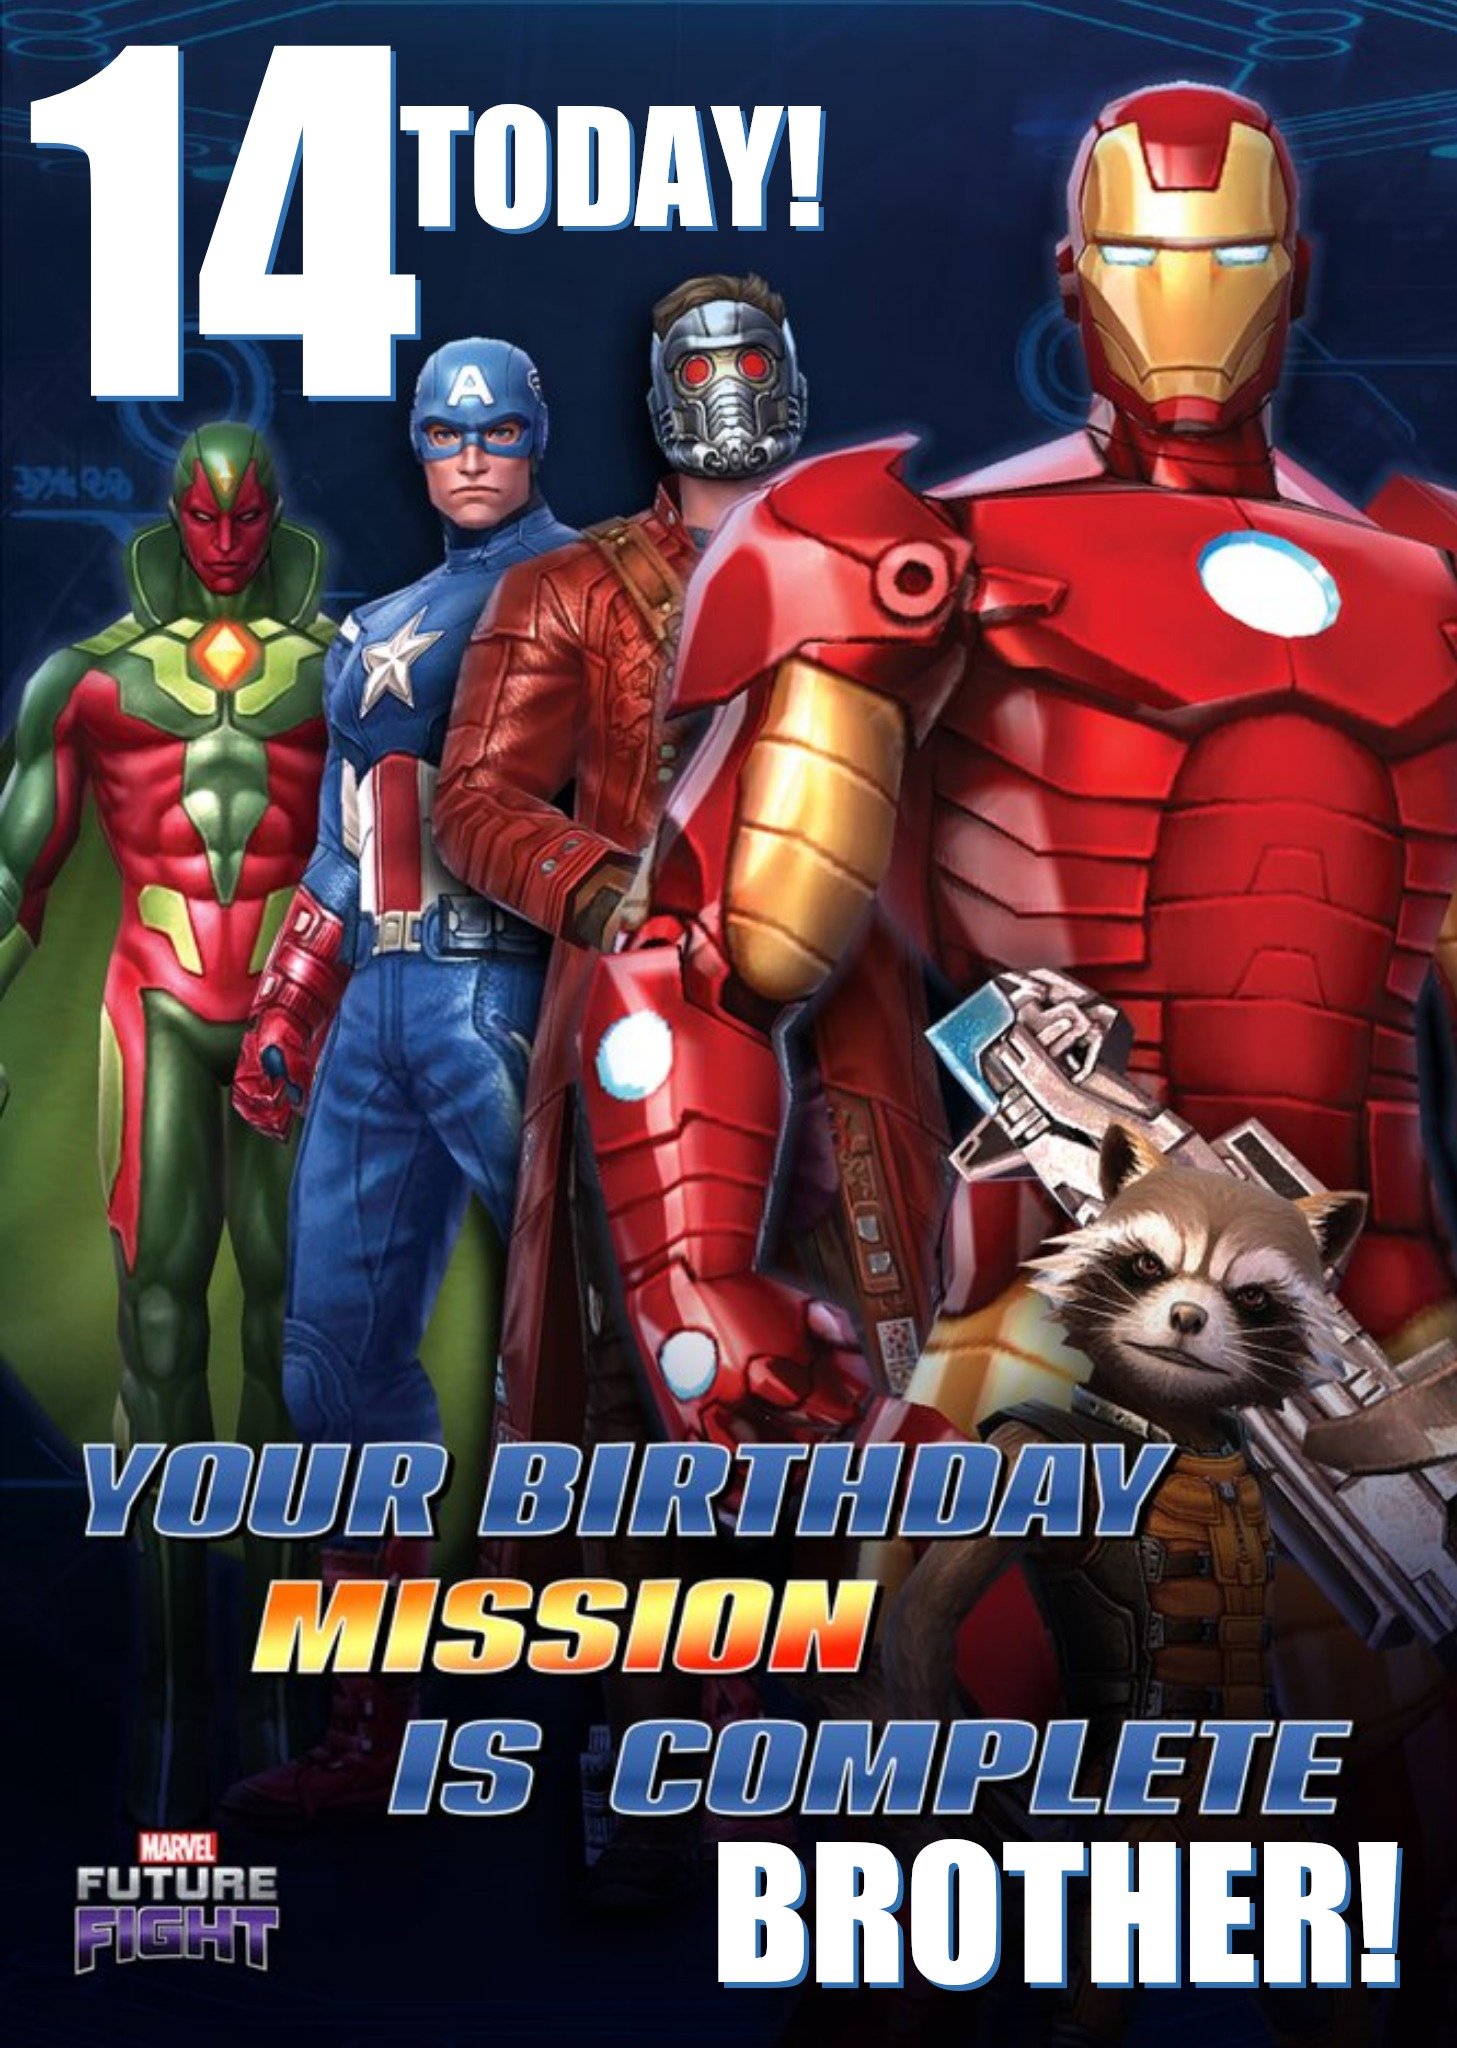 Marvel Future Fight 14 Today Gaming Birthday Card, Large